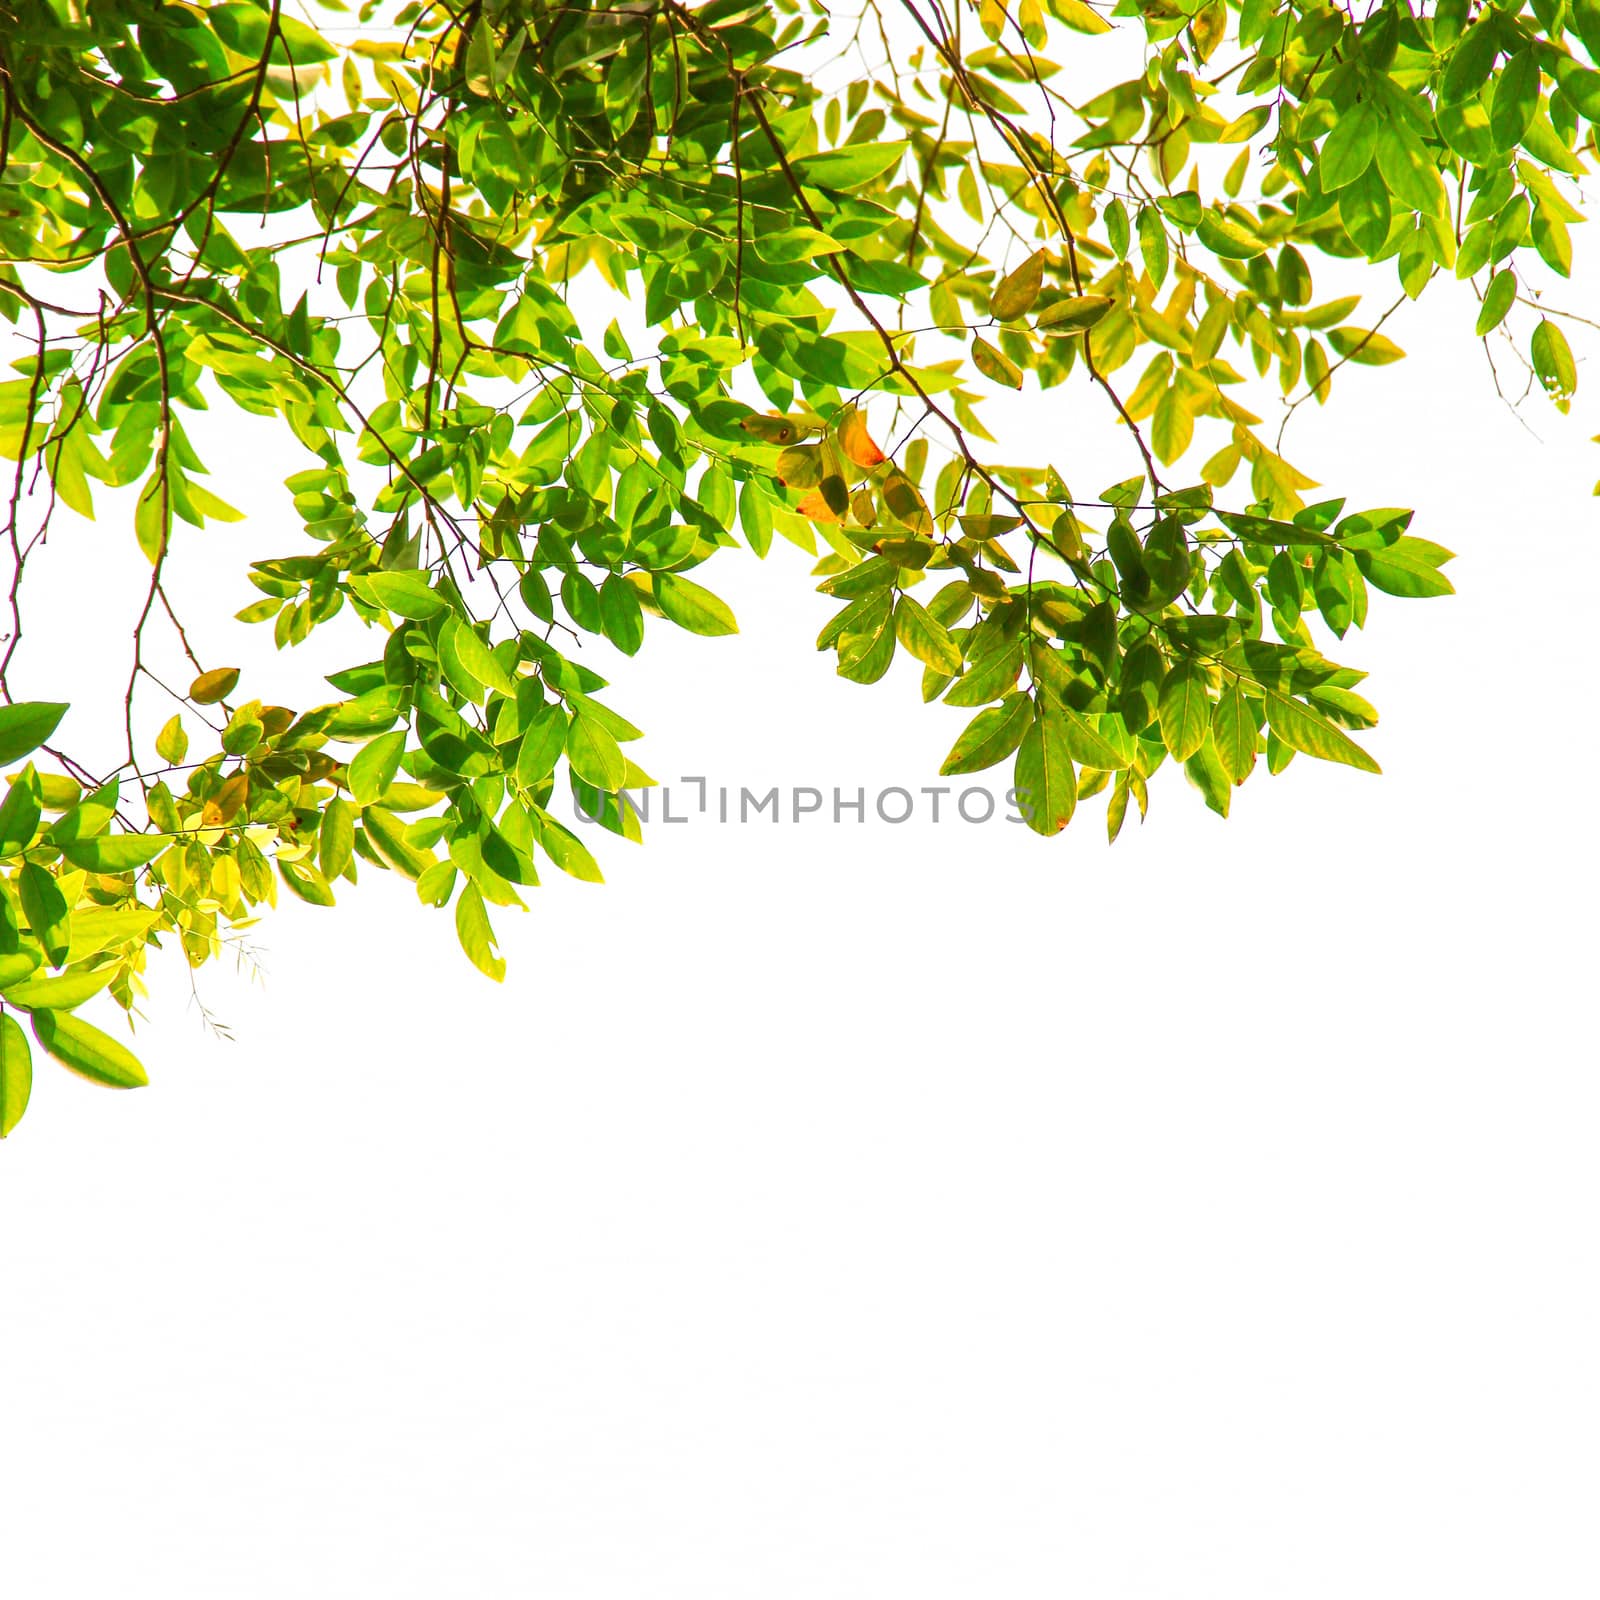 Green leaf and branches isolated on white background